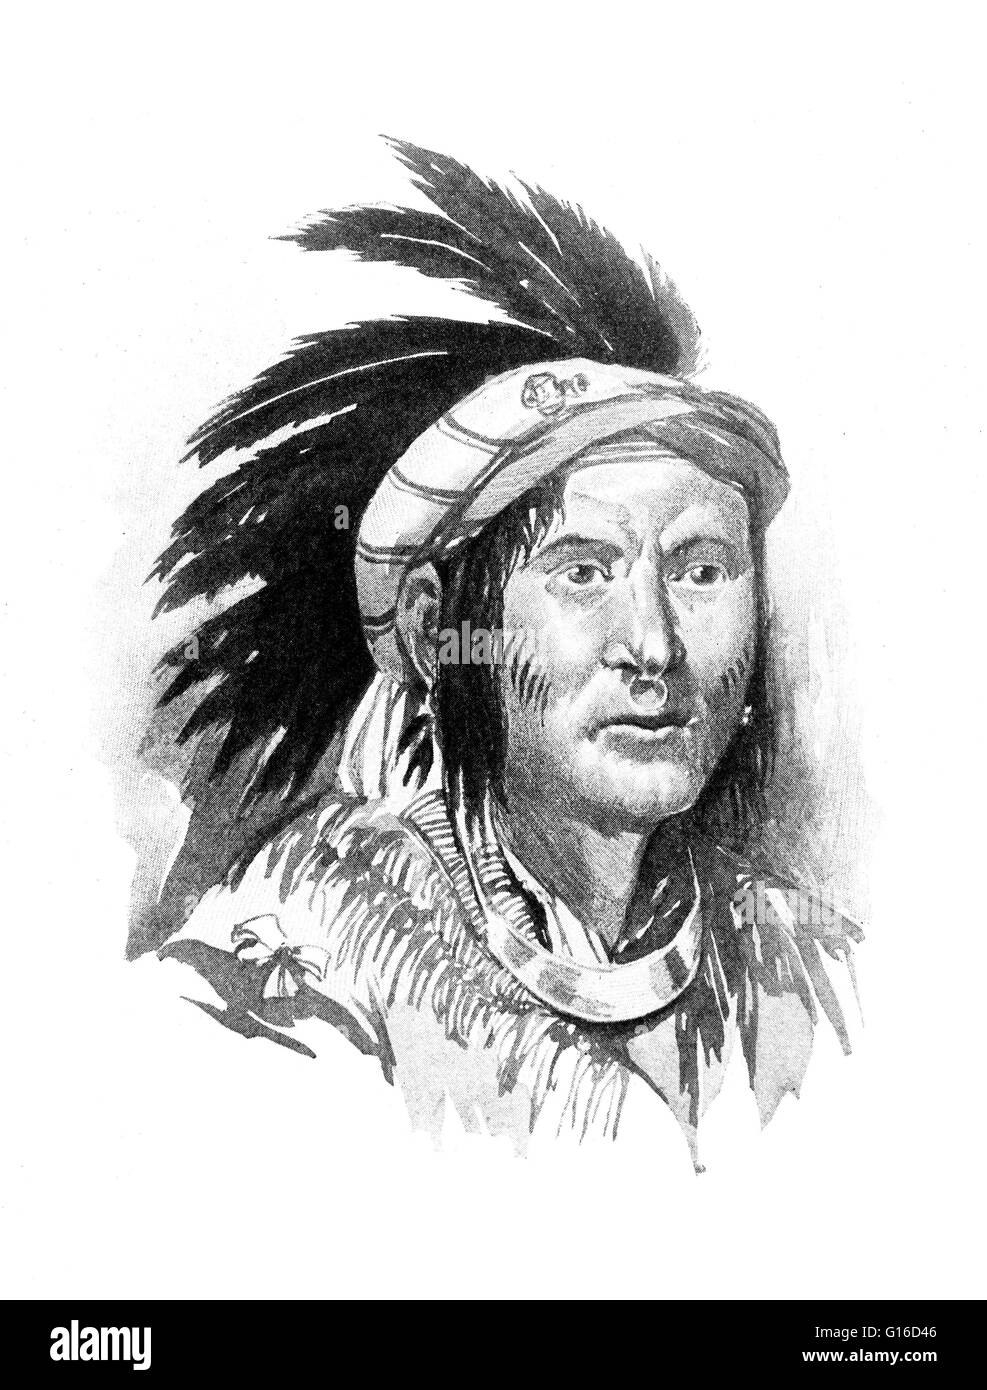 Pontiac (1720 - April 20, 1769) was an Ottawa war chief who became famous for his role in Pontiac's Rebellion (1763-1766). After the French and Indian War, Native American allies of the defeated French found themselves increasingly dissatisfied with the t Stock Photo